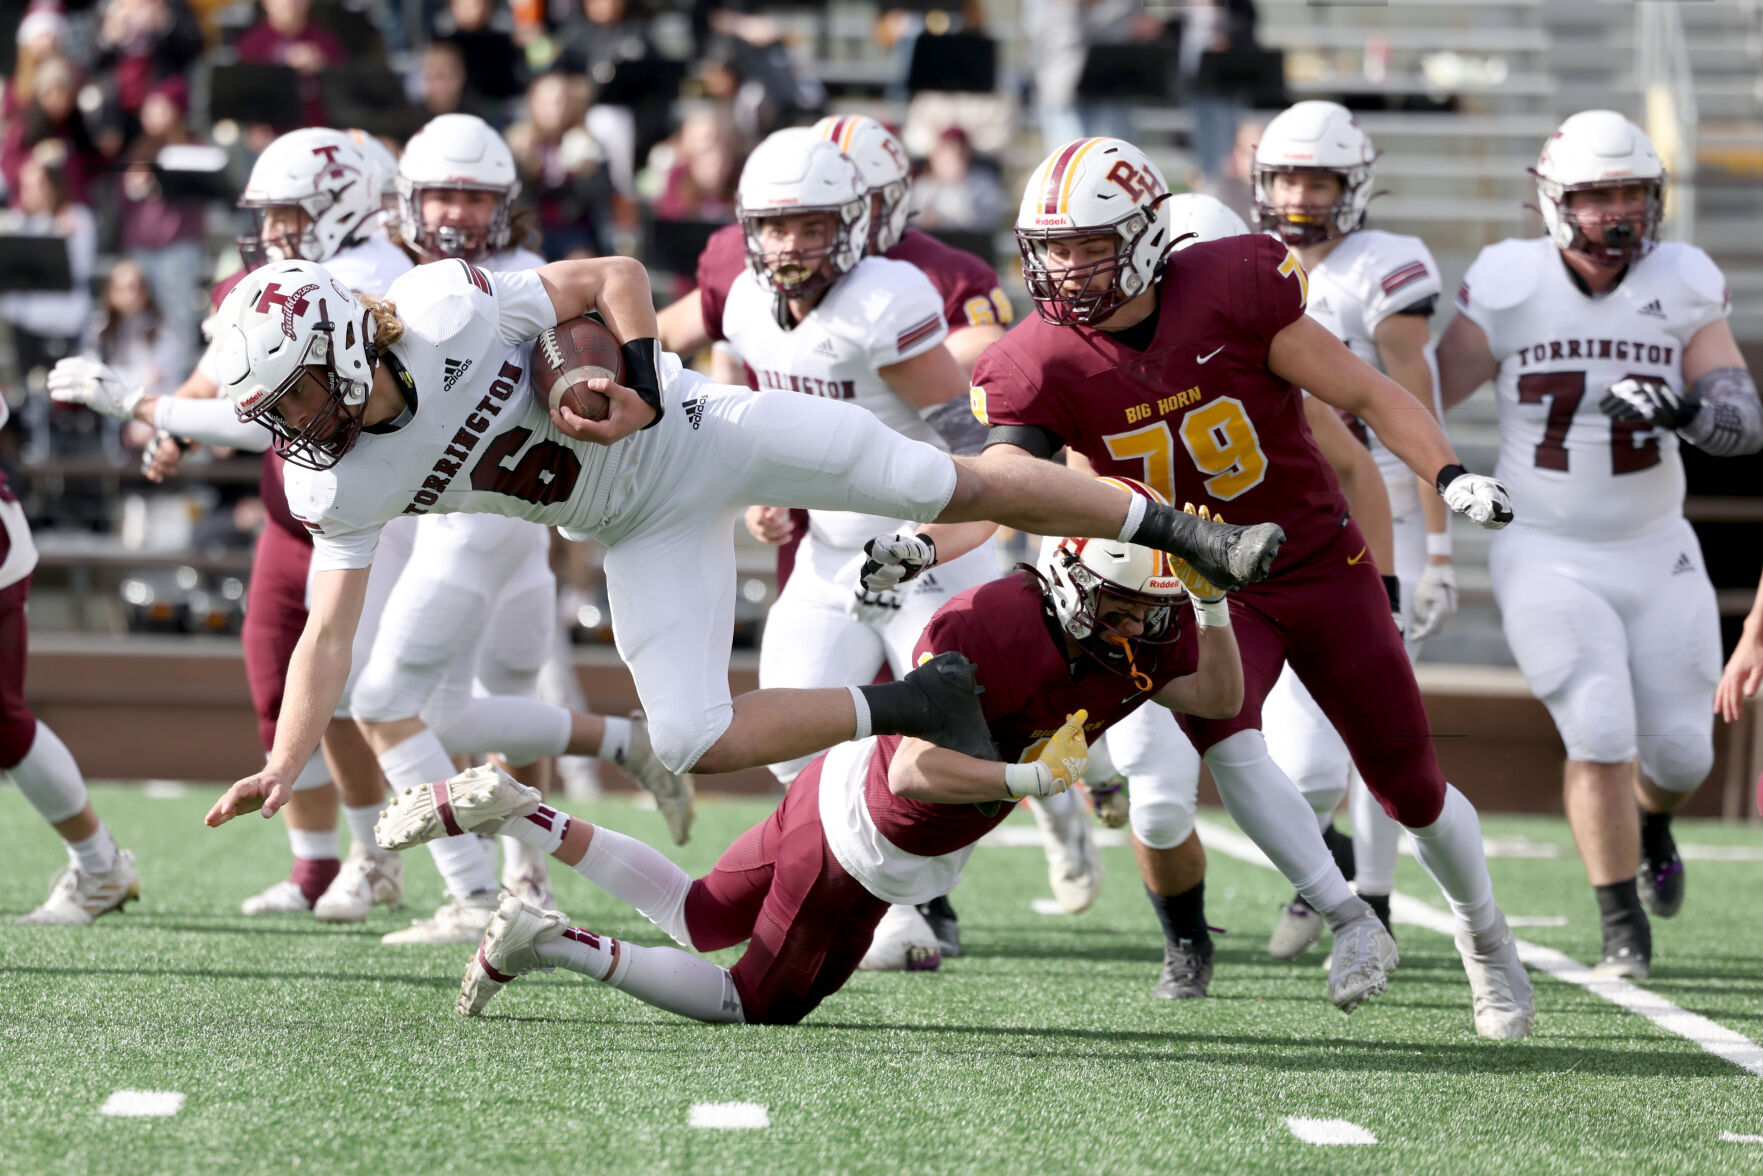 Torrington Trailblazers clinch Wyoming State High School Class 2A Football Championship with dominant defensive performance